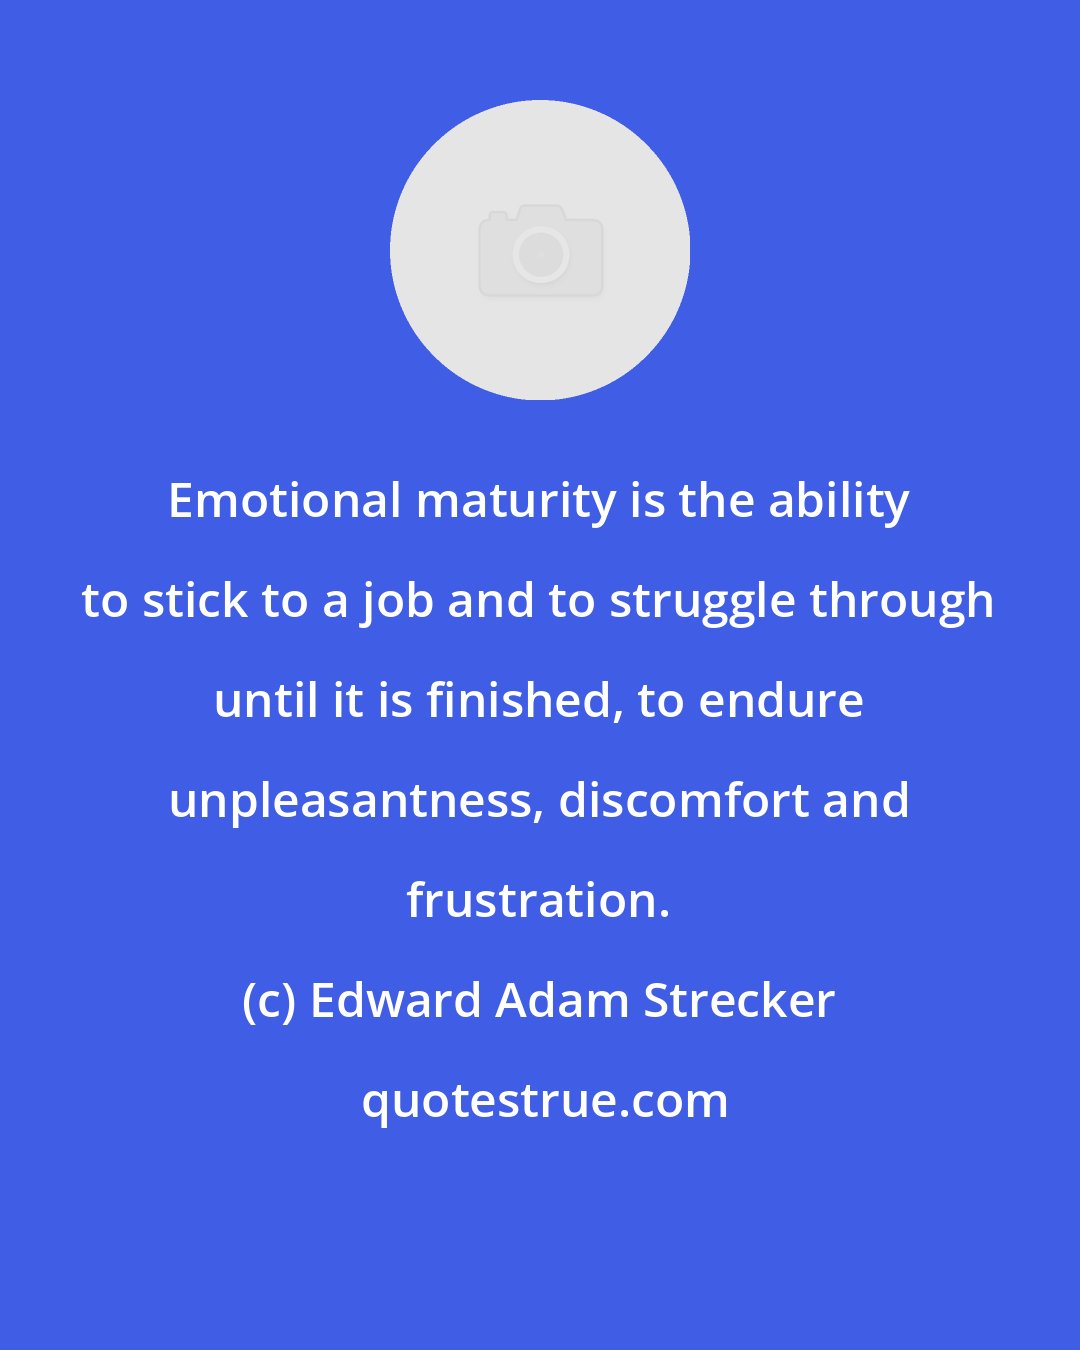 Edward Adam Strecker: Emotional maturity is the ability to stick to a job and to struggle through until it is finished, to endure unpleasantness, discomfort and frustration.